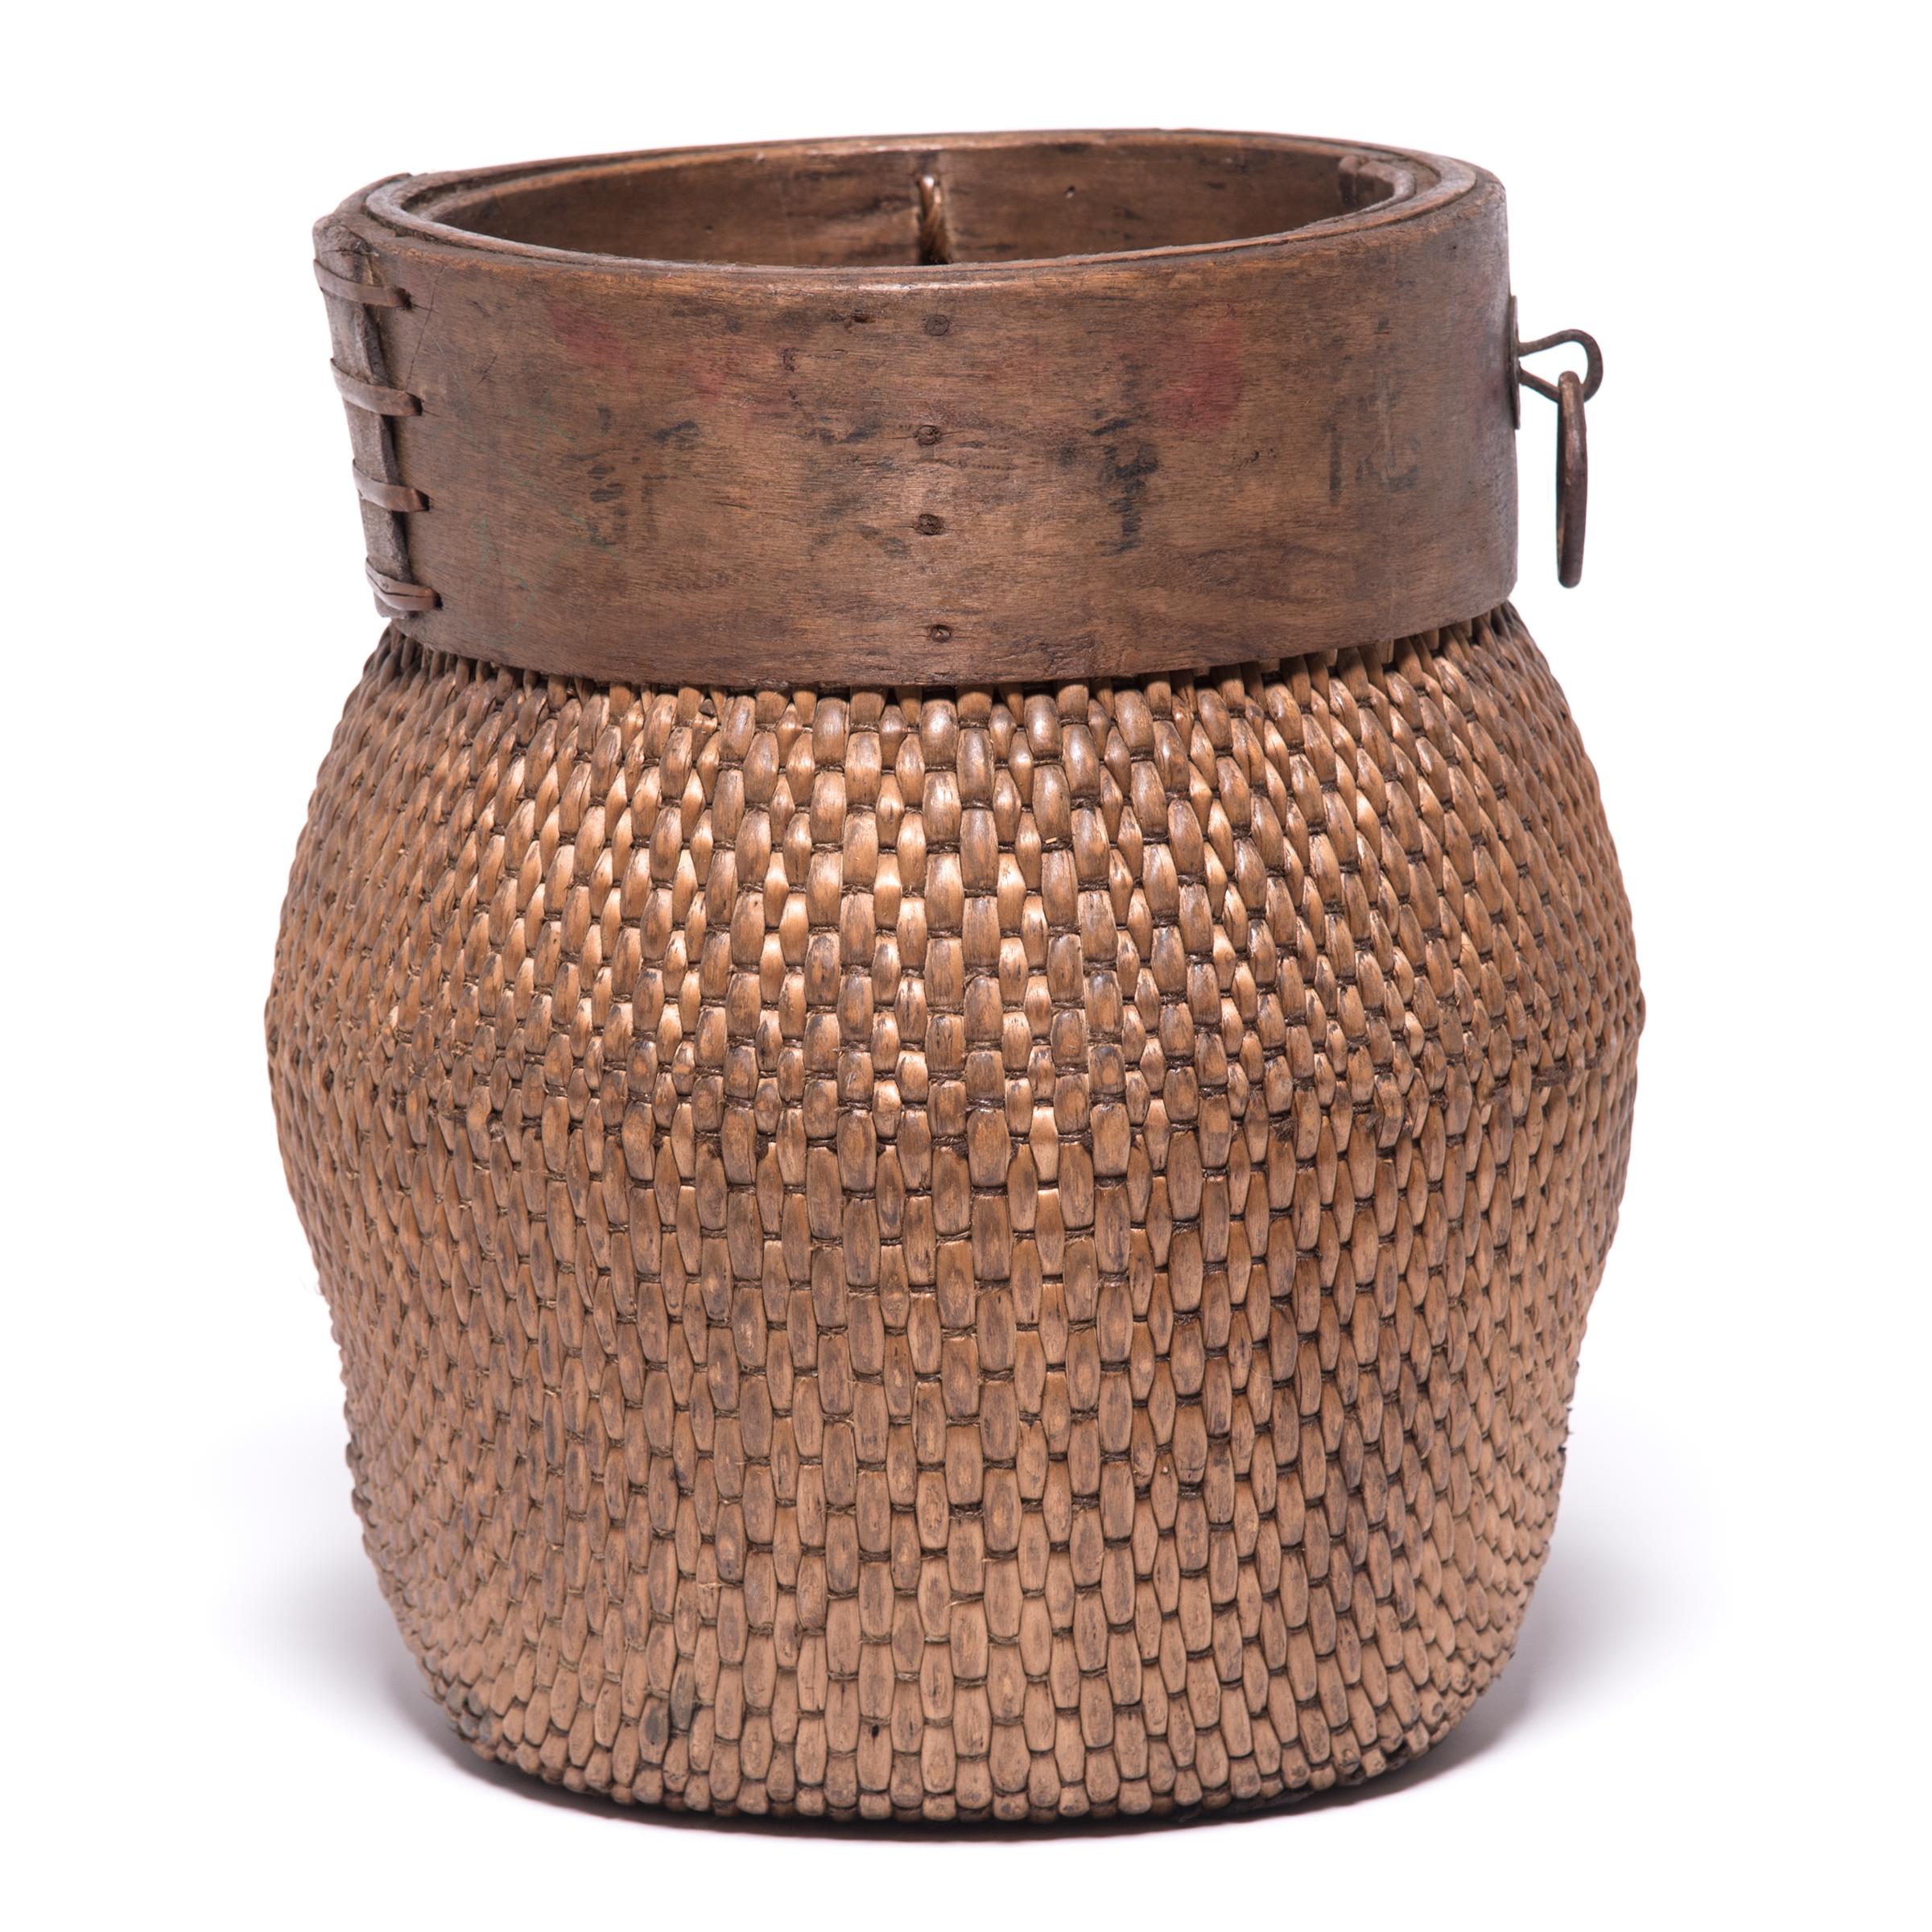 Centuries ago, a reed fisherman’s basket like this one would have been fairly common in rural China: an everyday item that would have been used until it was worn through. This particular example remains in beautiful condition and so a century later,